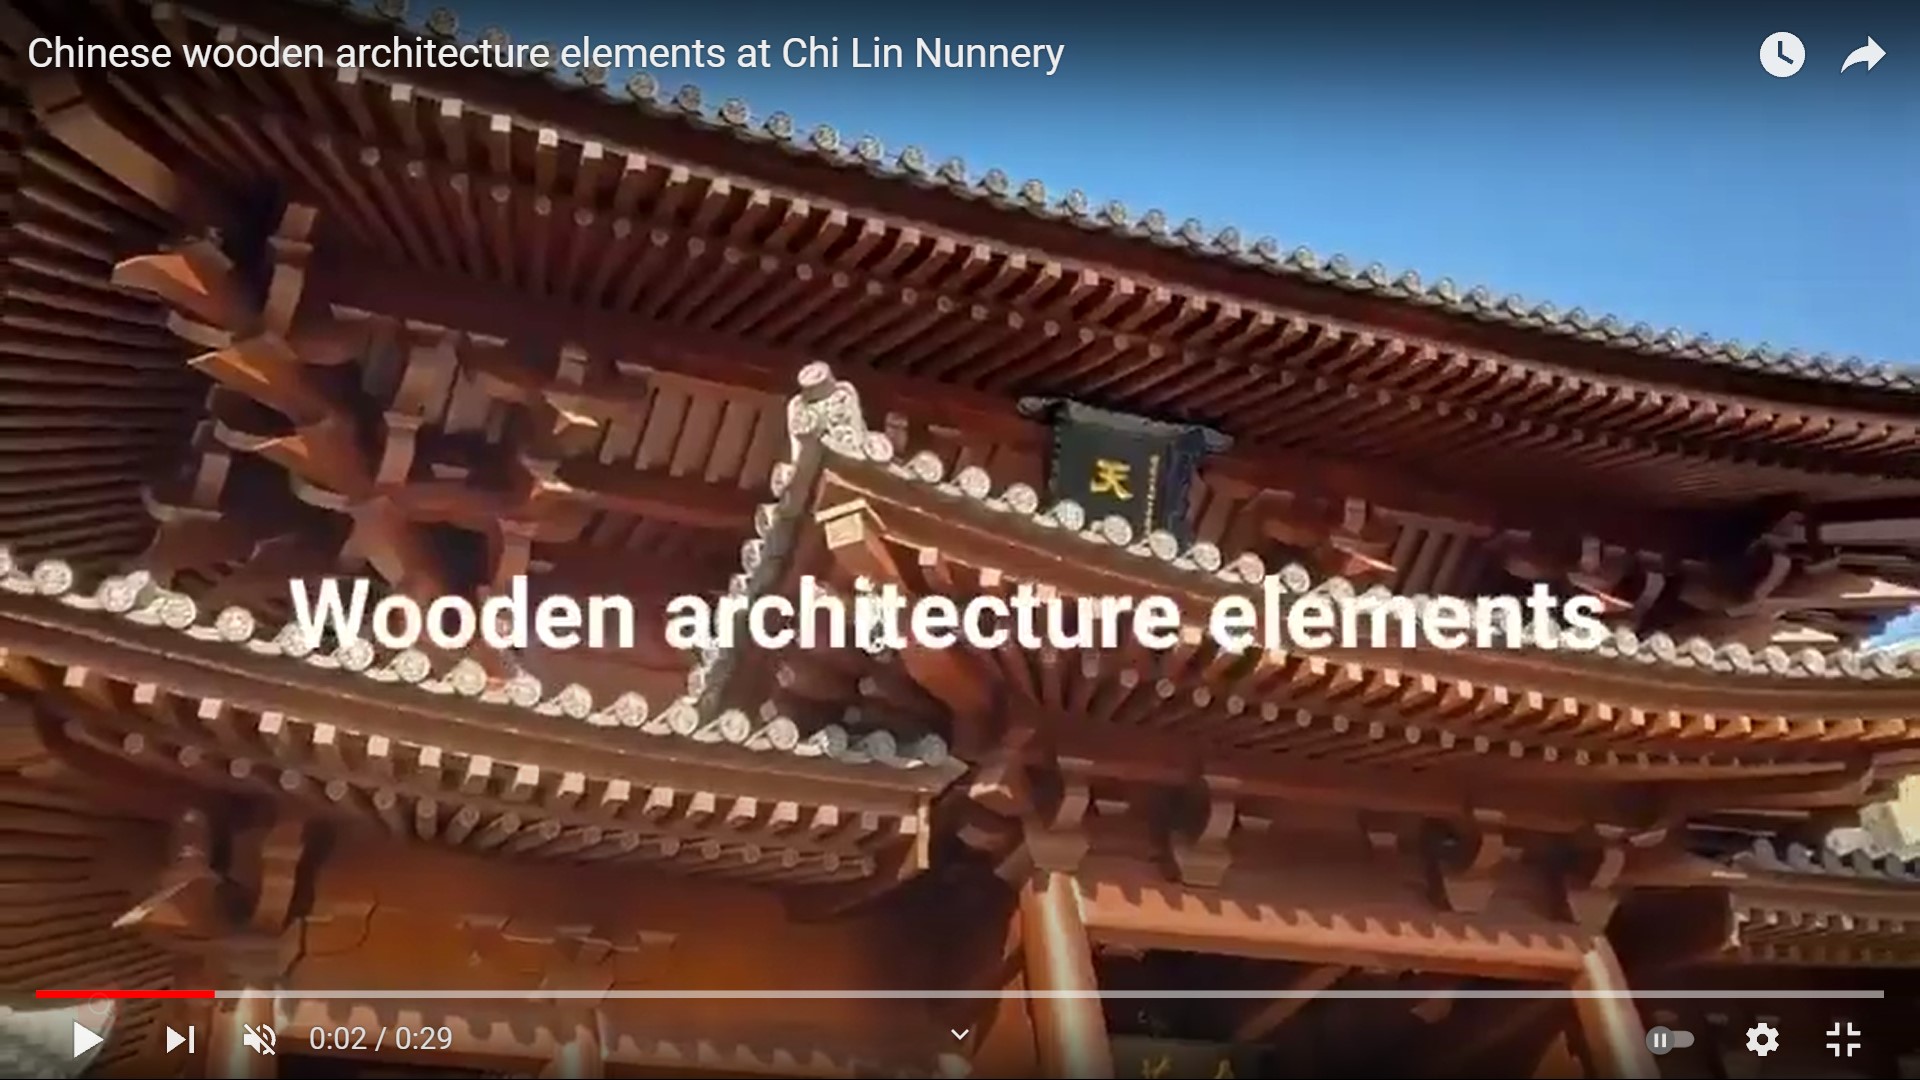 Frank's "Chinese wooden architecture elements at Chi Lin Nunnery" video